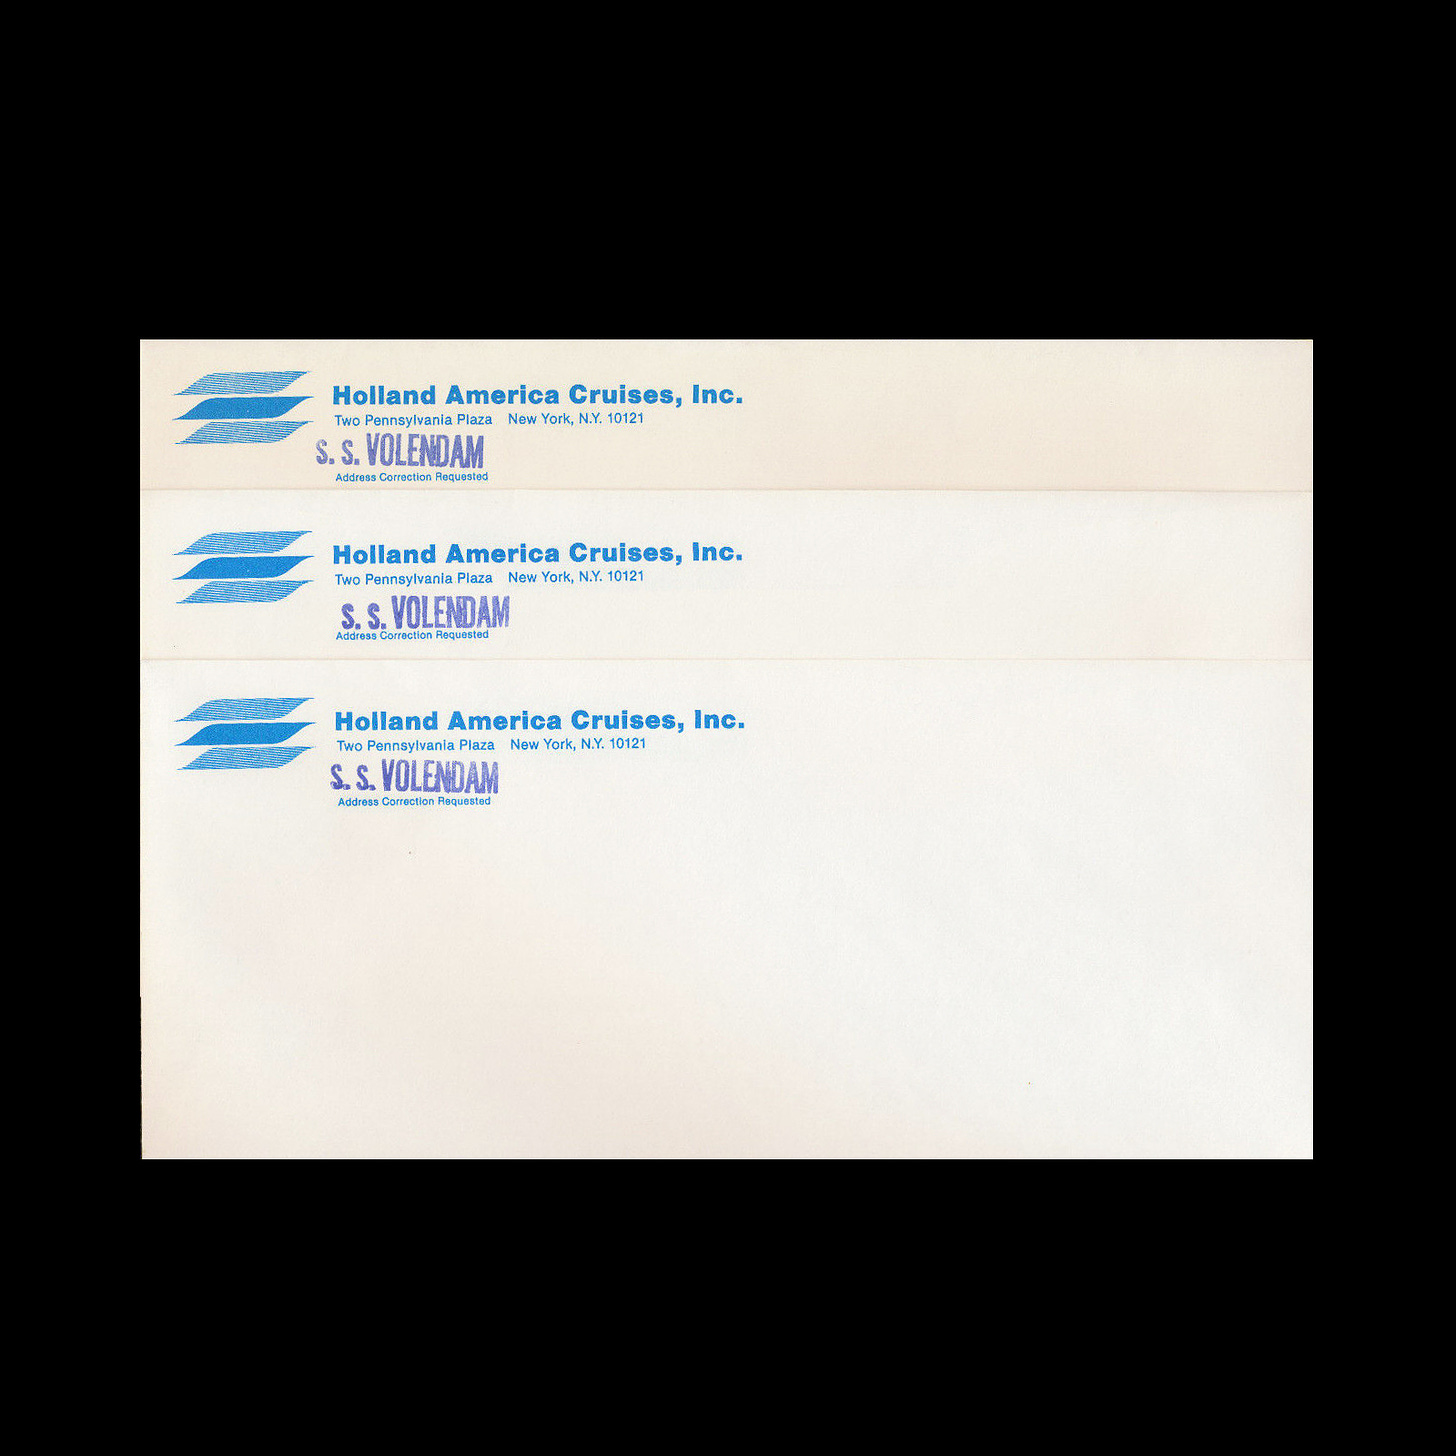 Envelopes and logo for Holland America Line by Will Van Sambeek